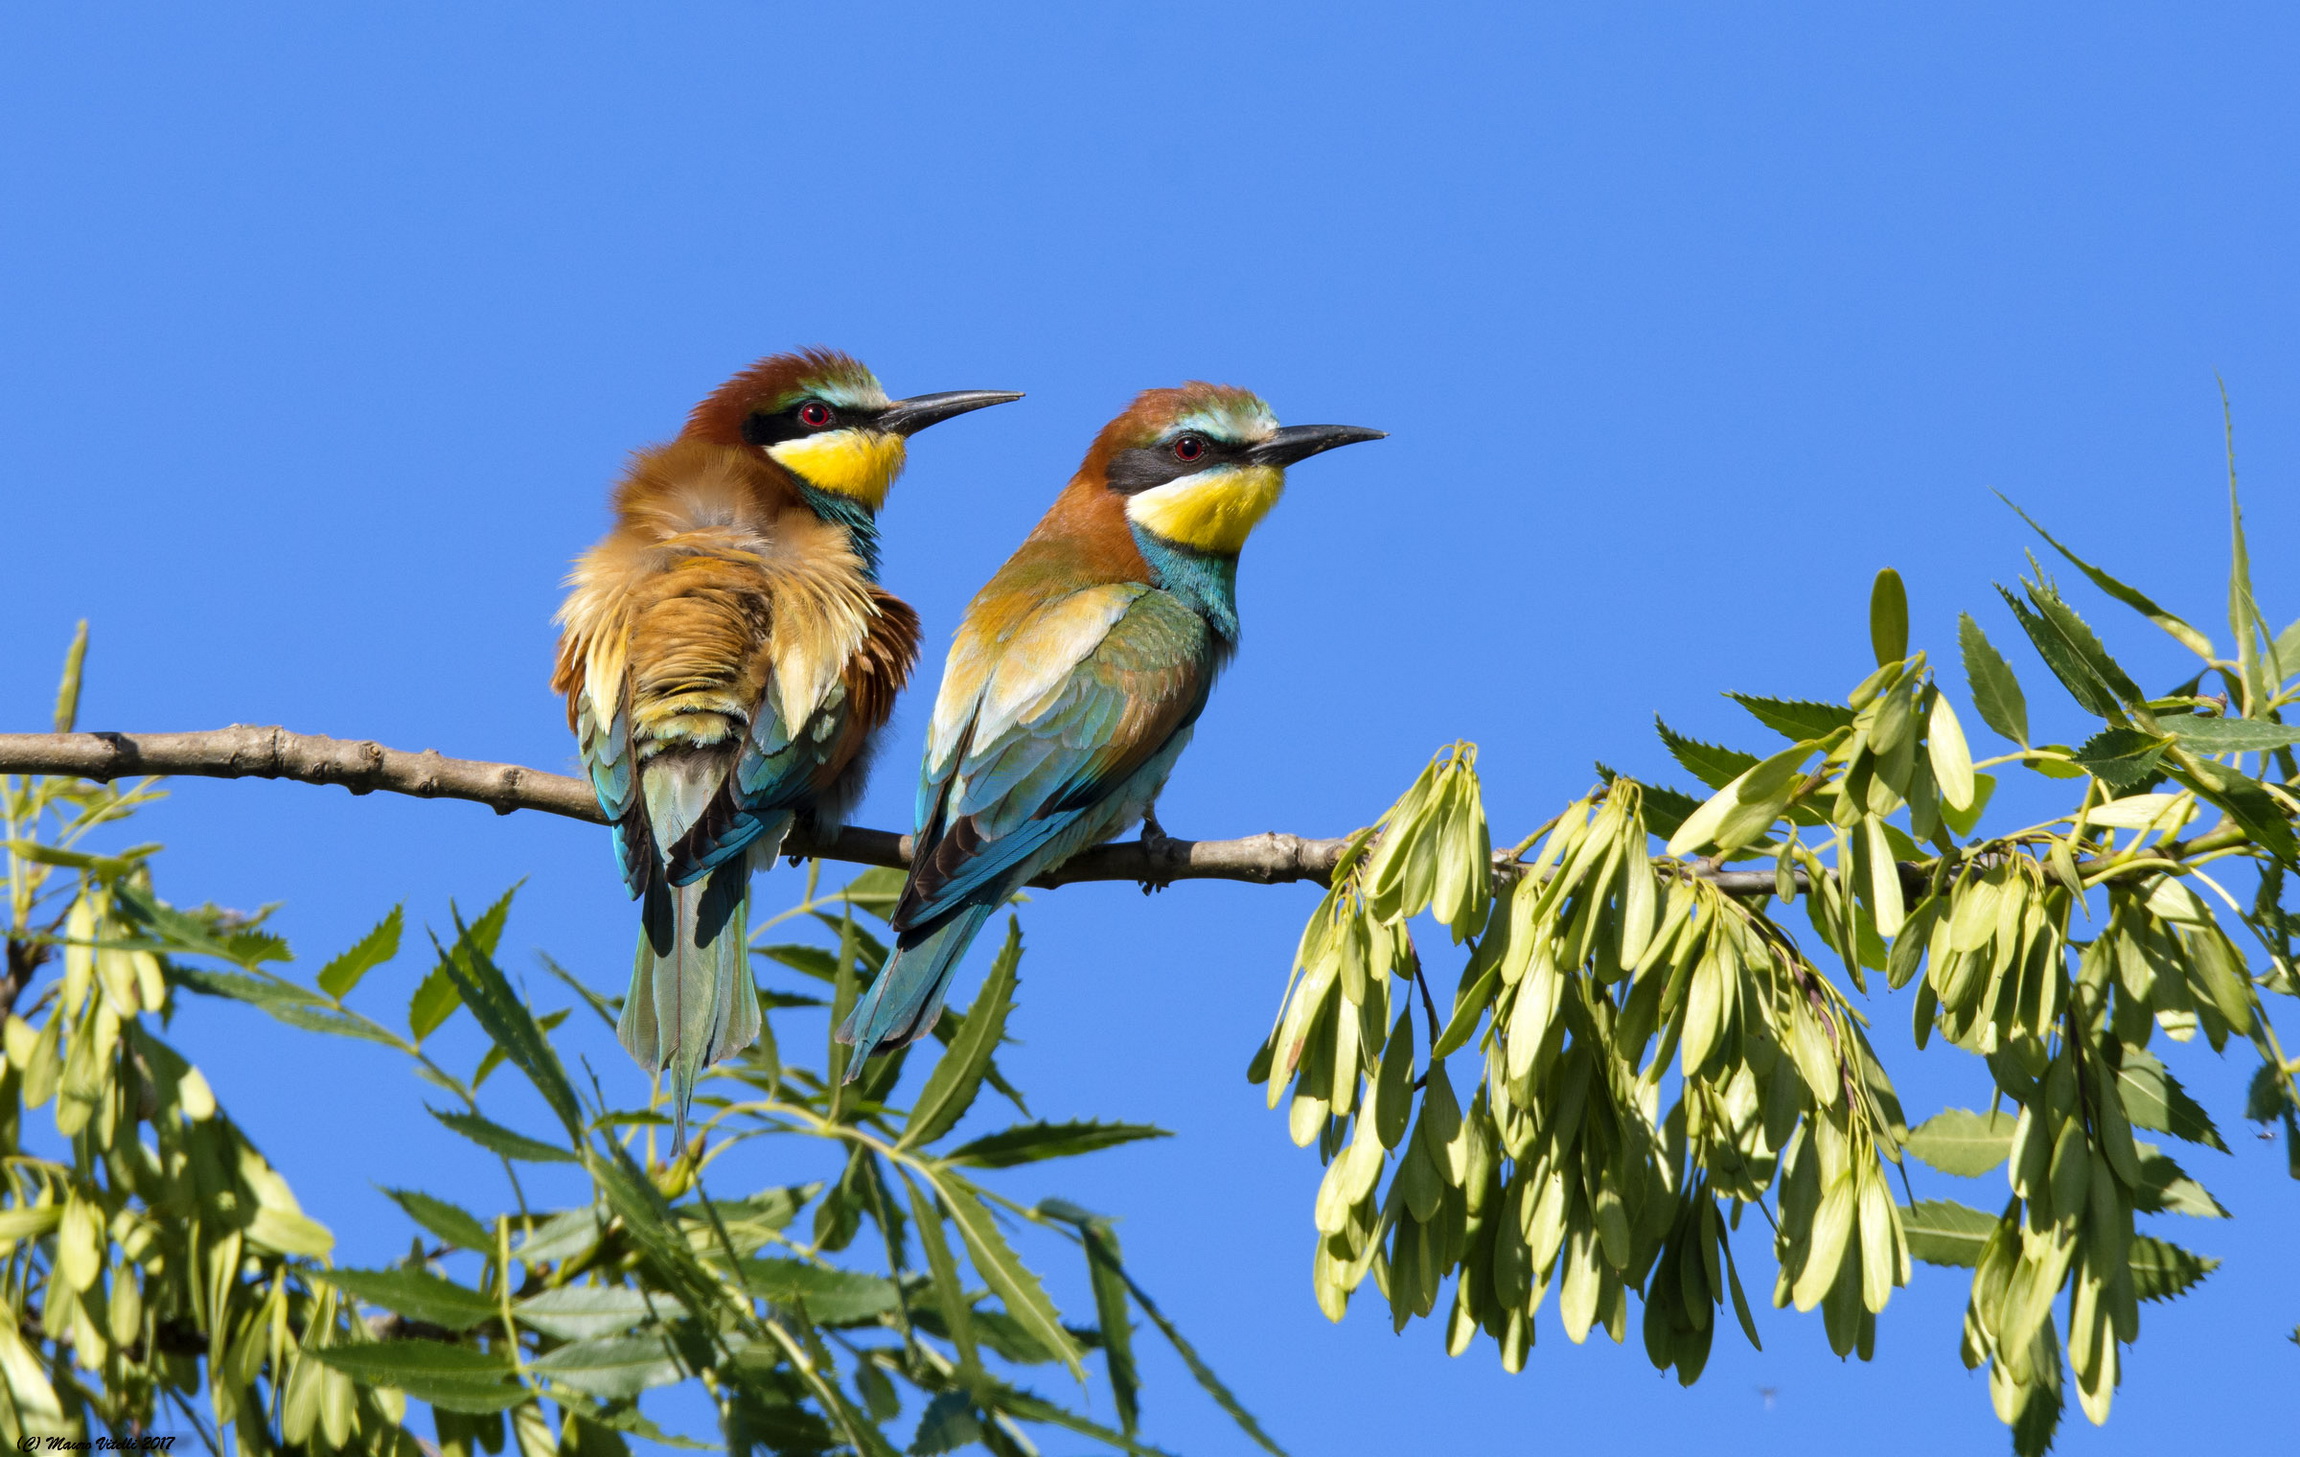 The couple (bee-eaters)...